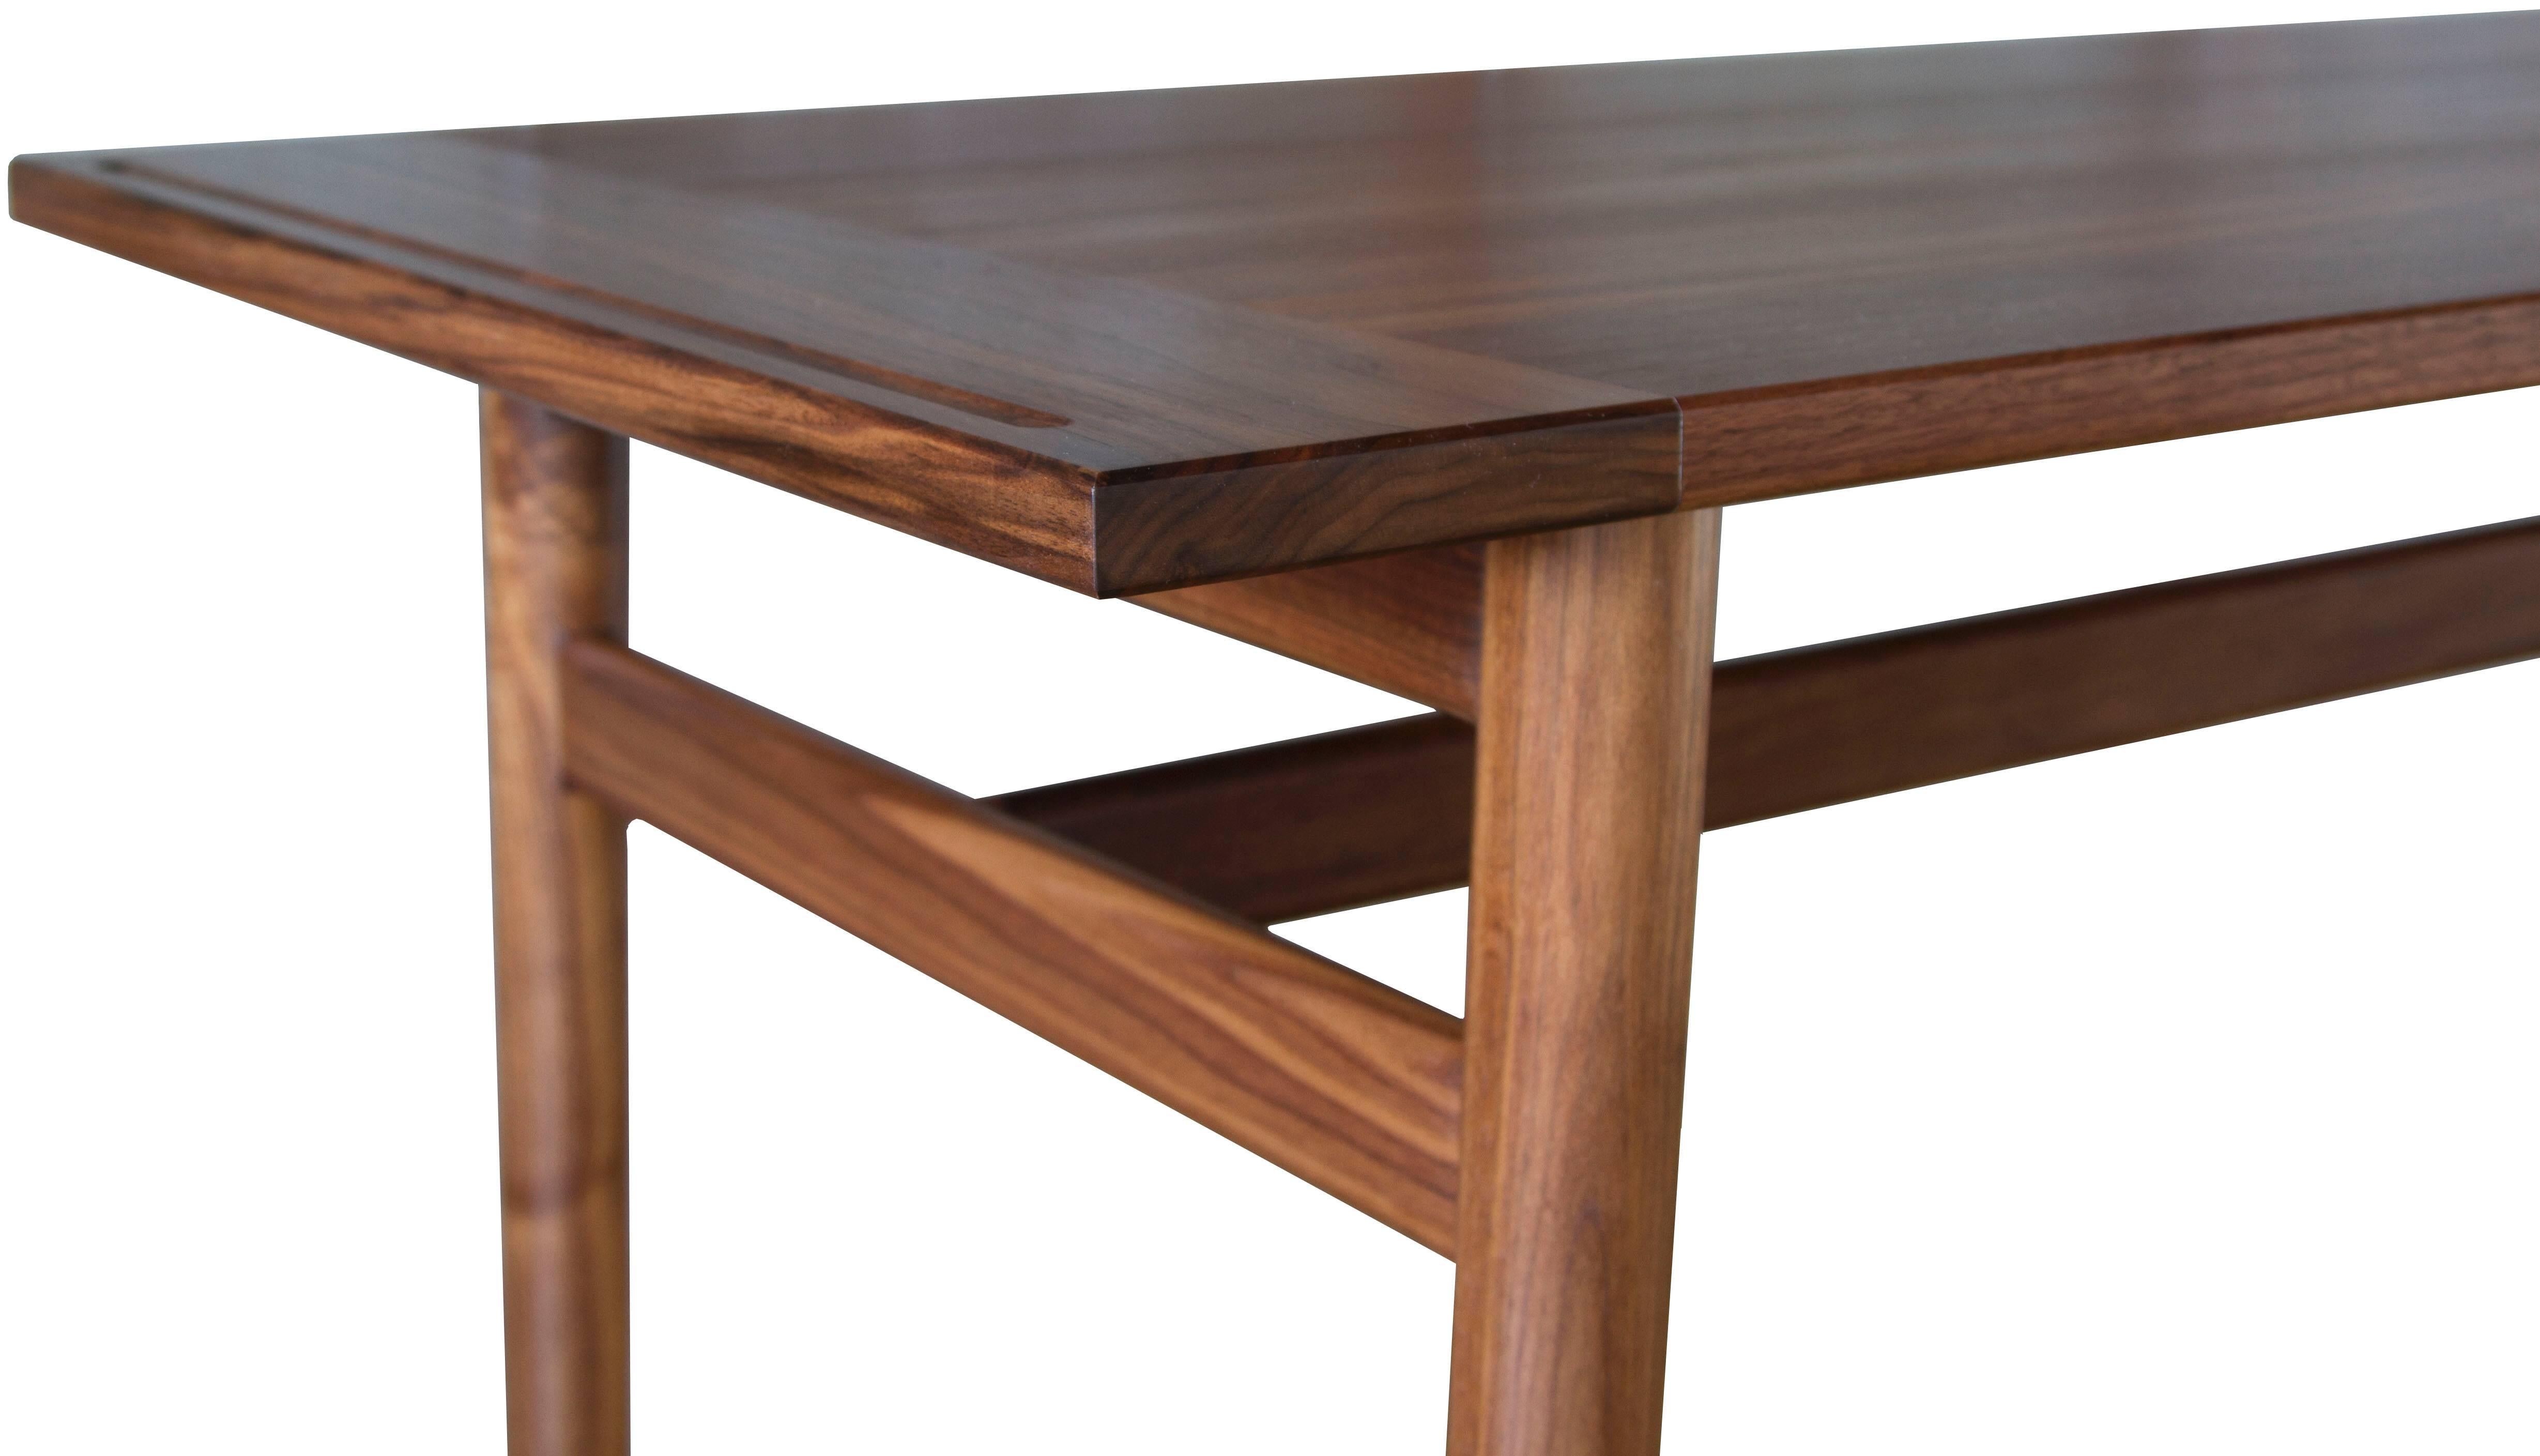 Modern Silbrook Table in Oiled Walnut - handcrafted by Richard Wrightman Design